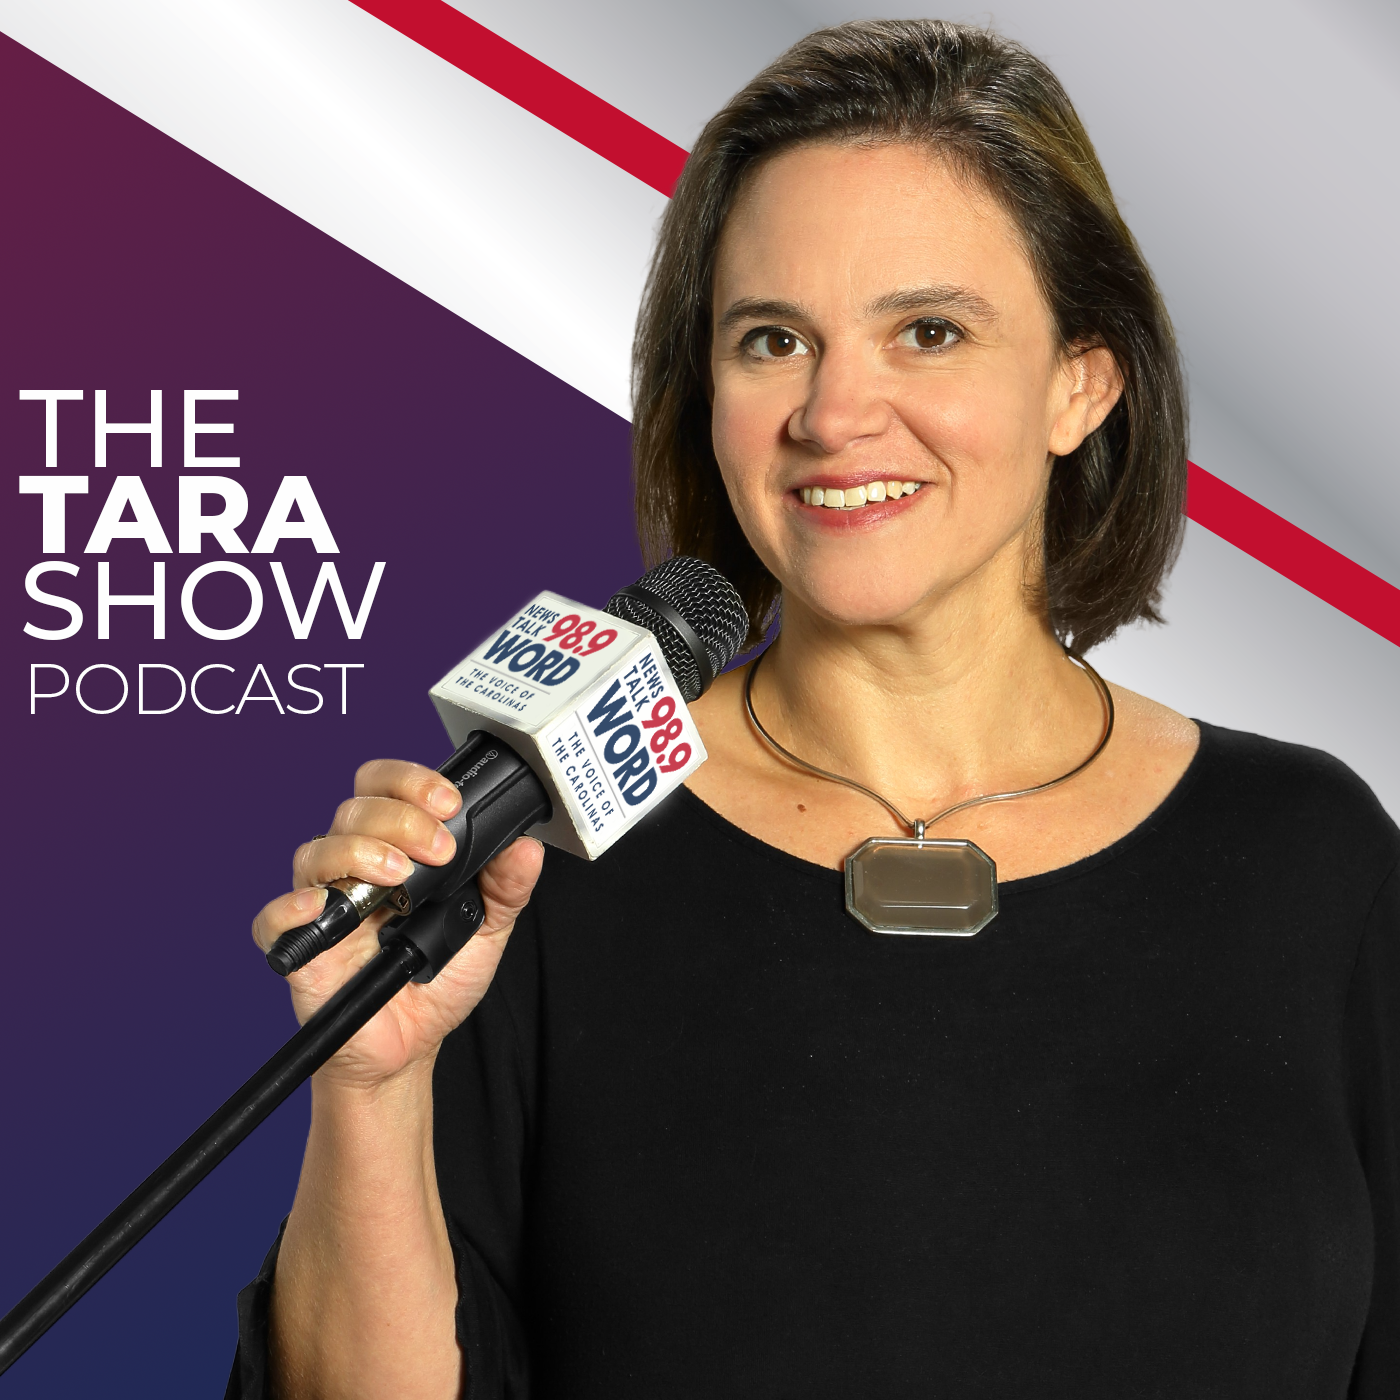 Hour 1: Tara - “The Corruption of the FBI” "Spying on the People" “Stop the FISA ACT” "Money in America"